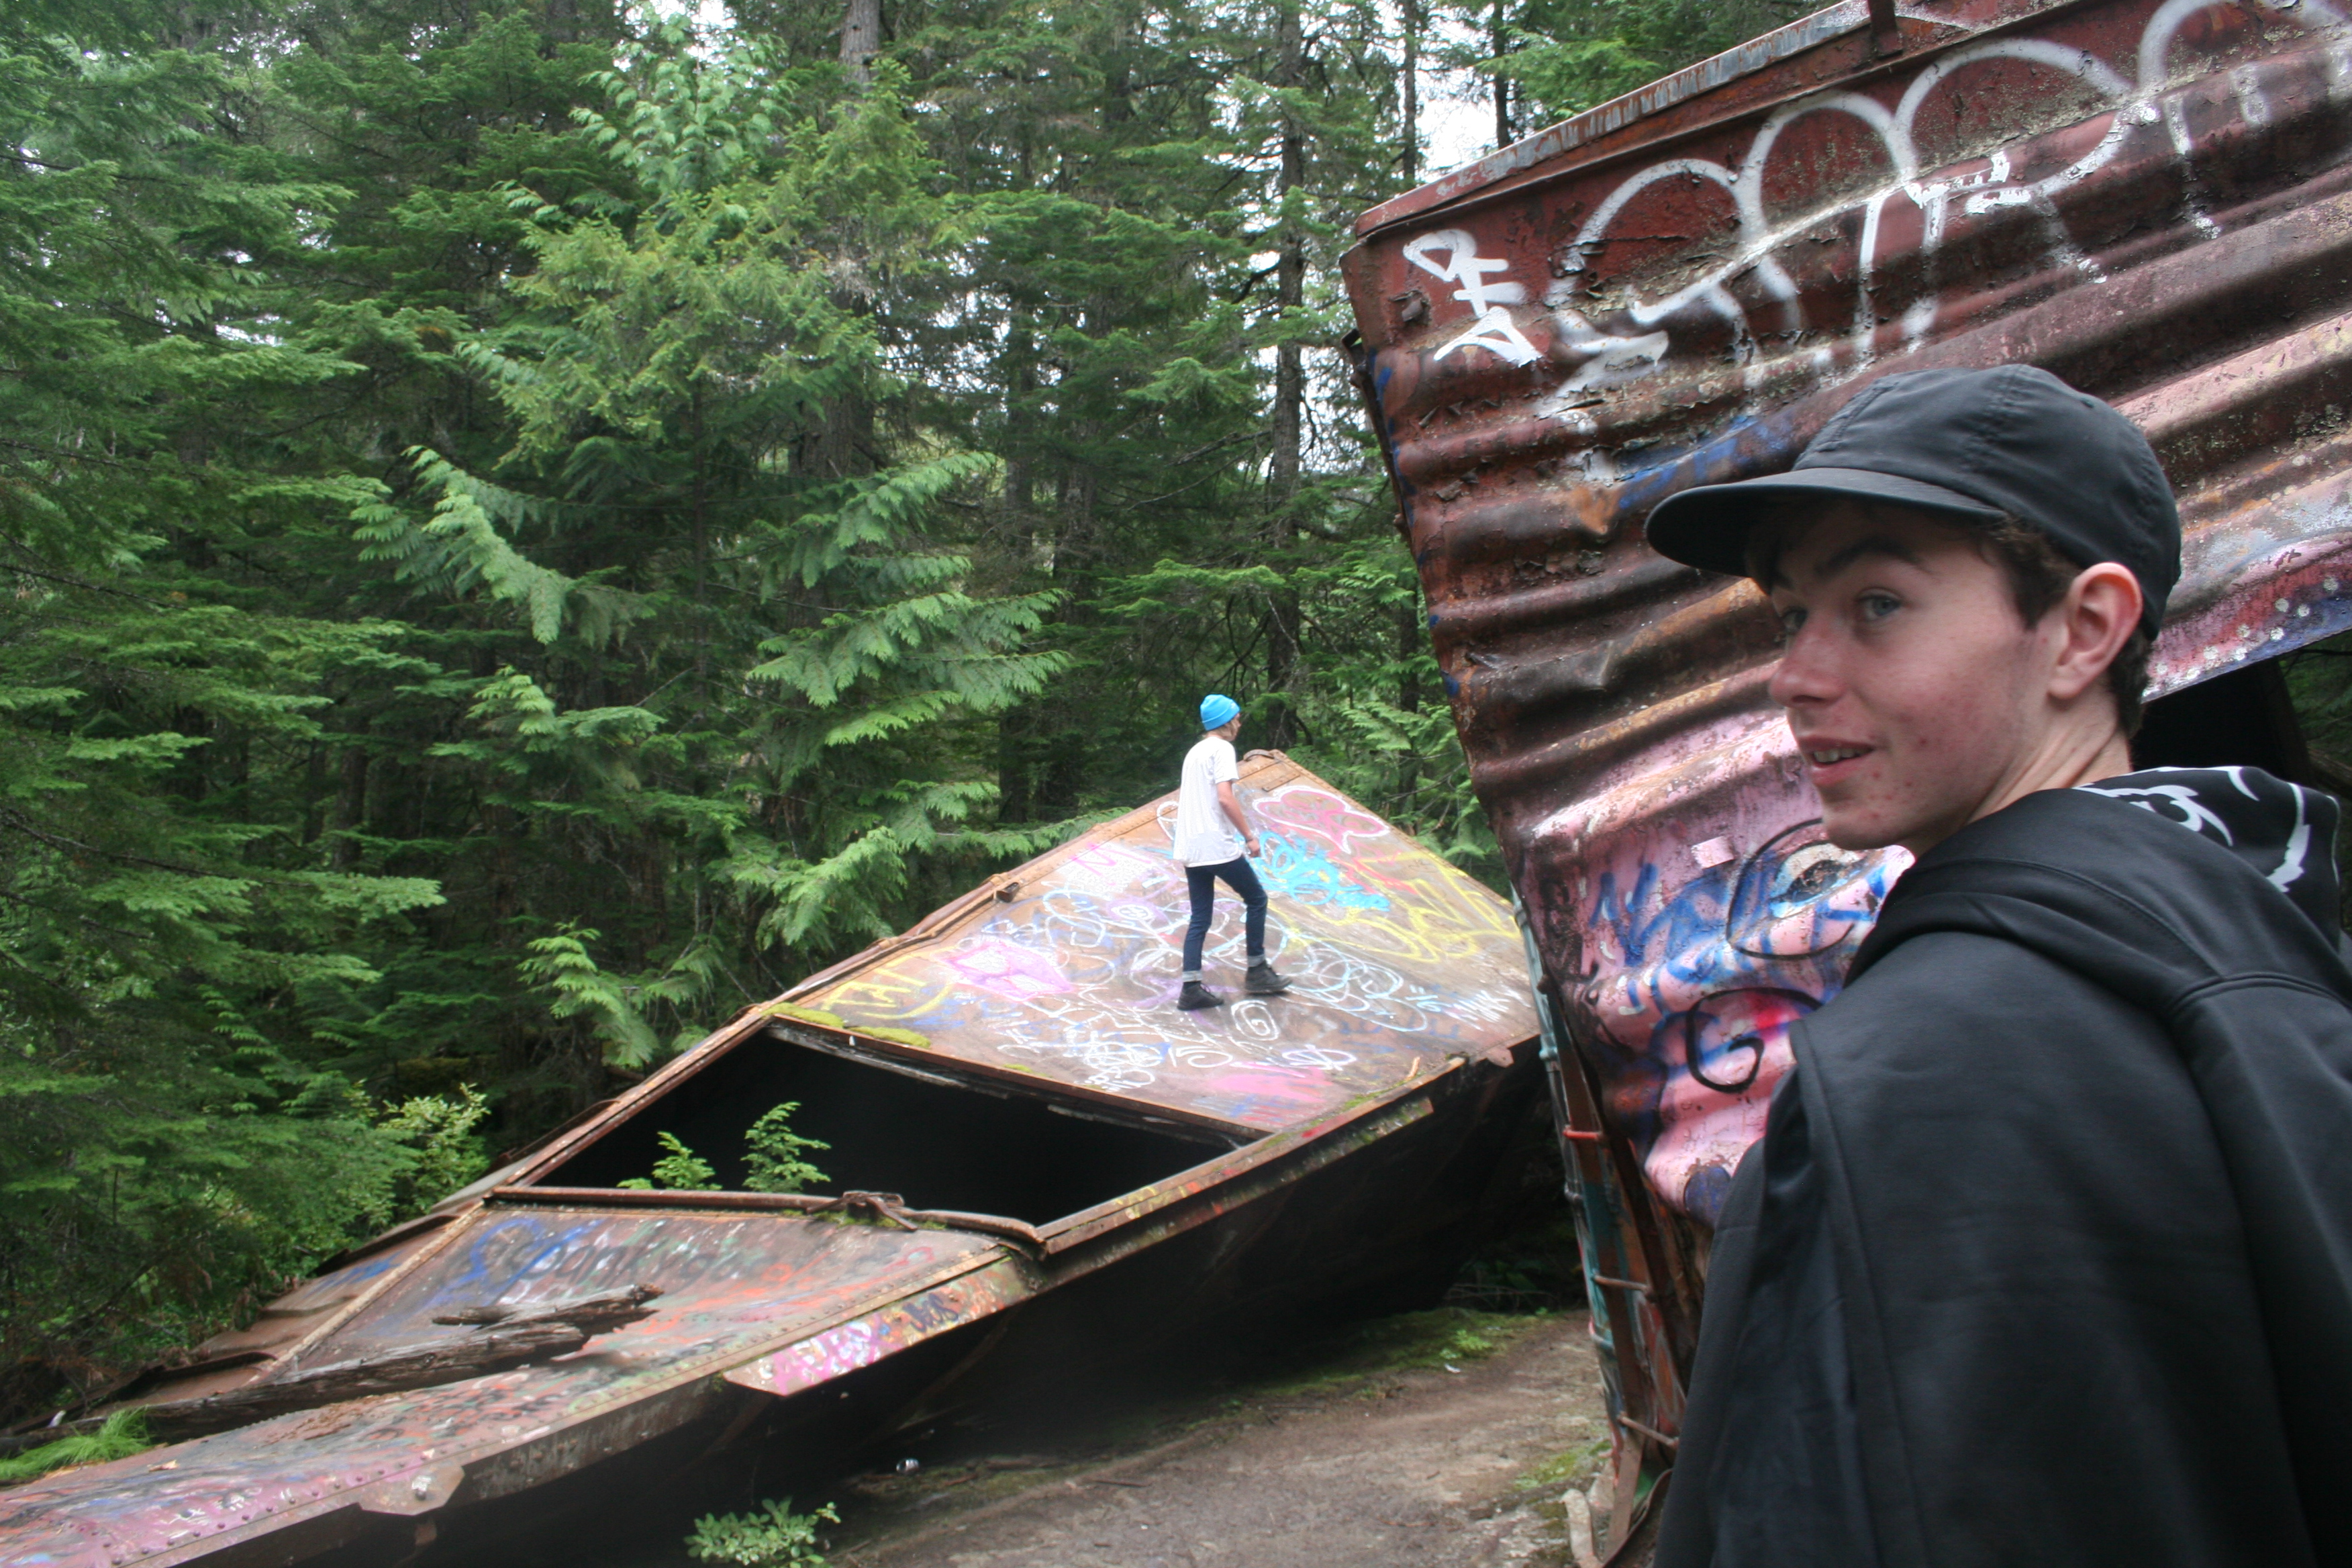 We get climbing on the train wreck containers with Shendo & Finn